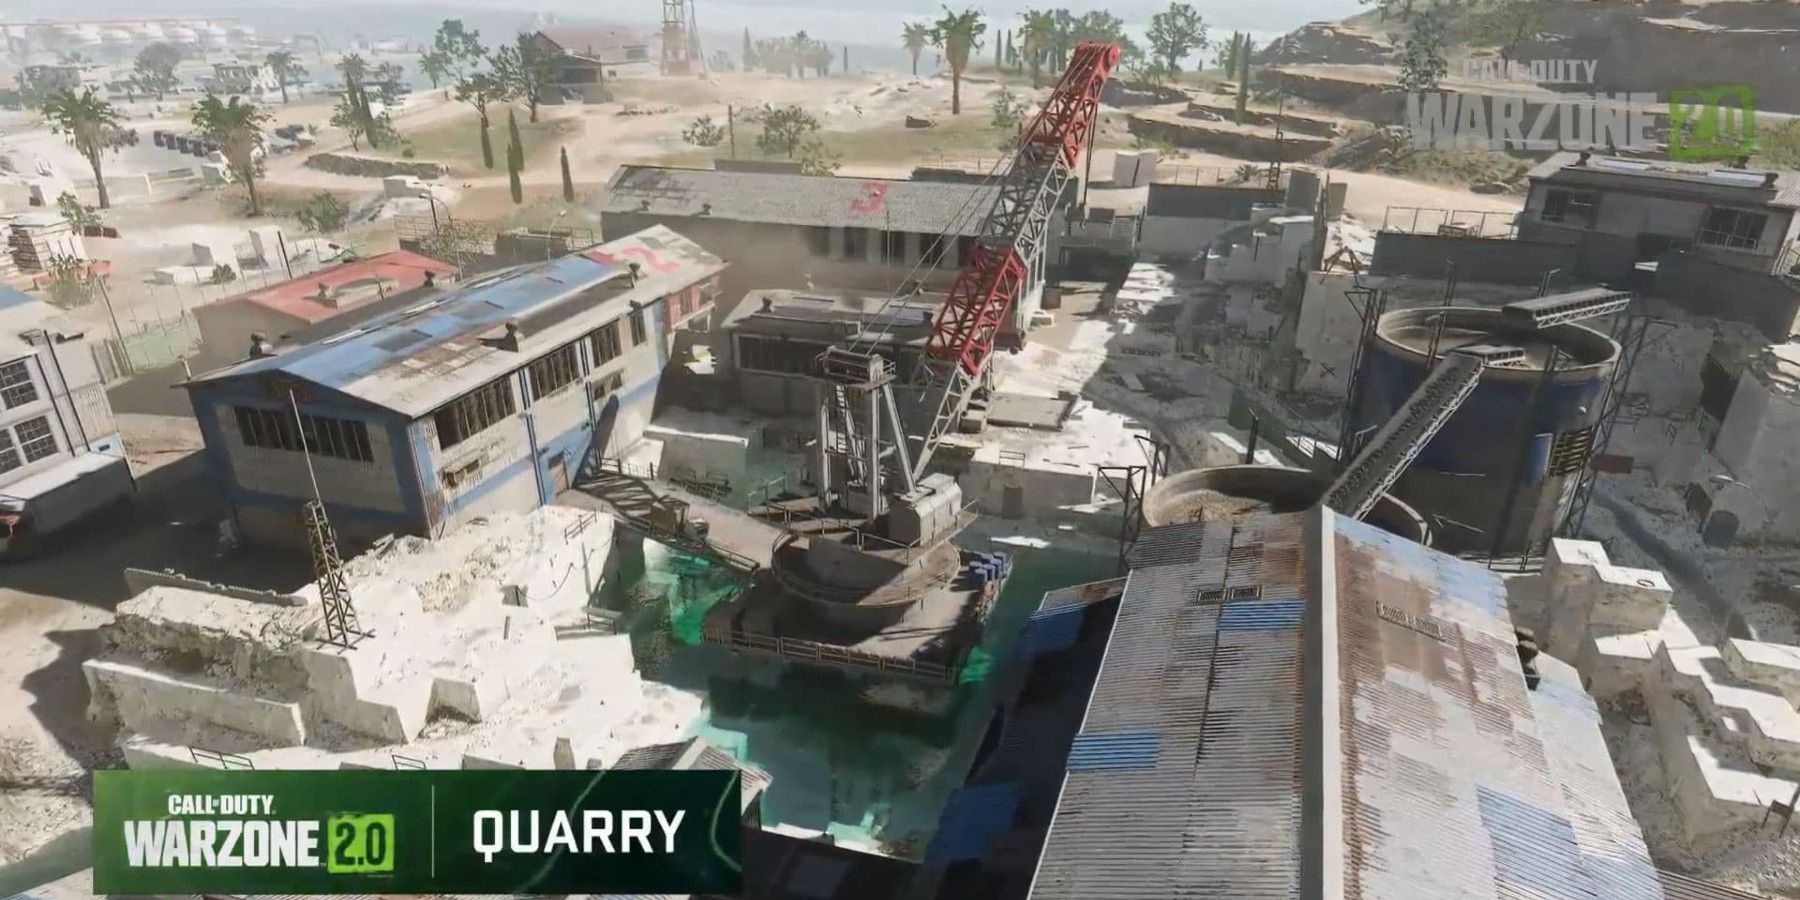 Call of Duty Warzone 2.0 Quarry